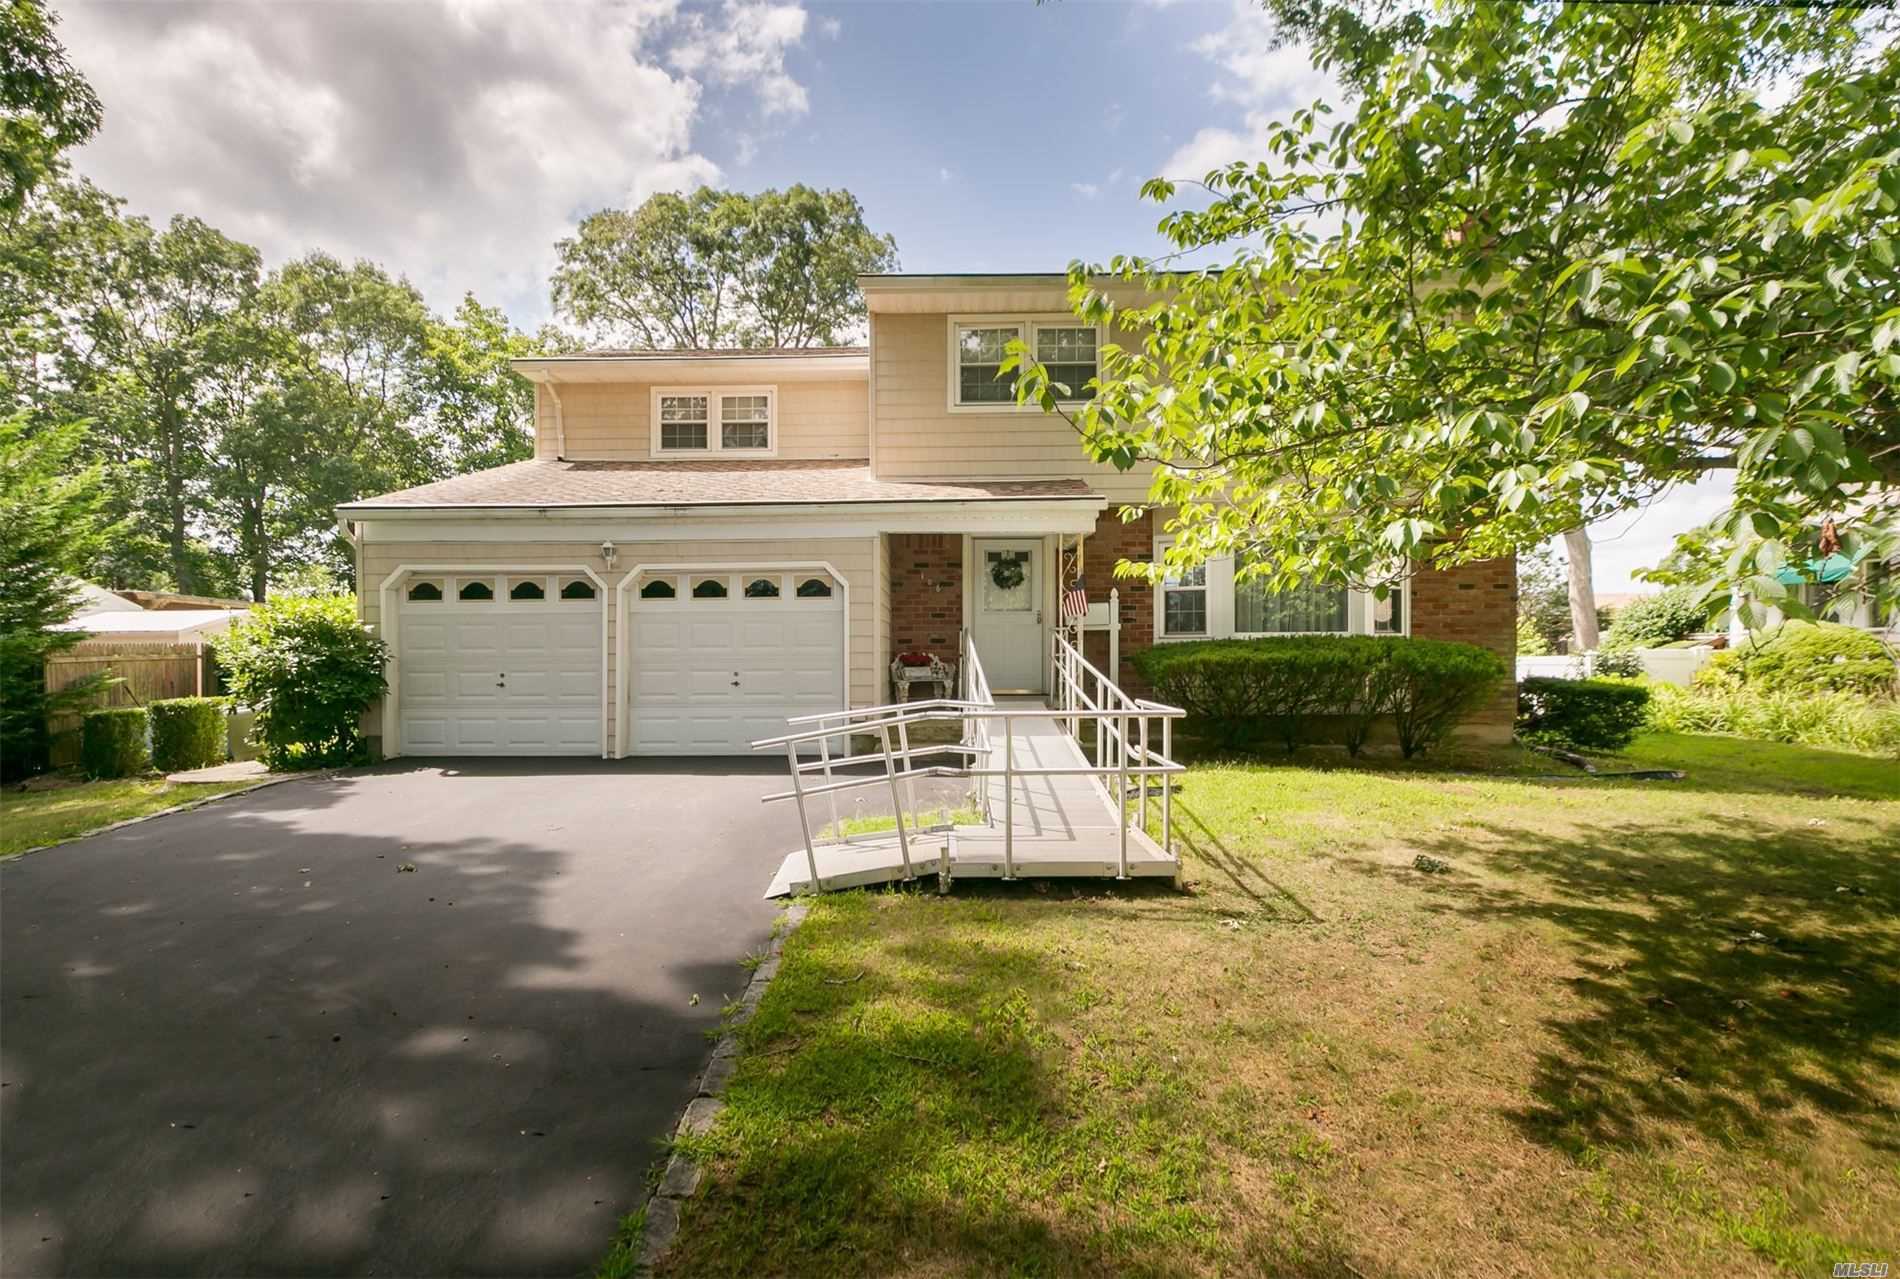 Come and See This Wonderful Colonial On A Dead End Private Street. Large Bedrooms, Master With Bath, Newer Utilities. Close To All. This One Won&rsquo;t Last. Bring Some Love and Make This Great Home Your Own.